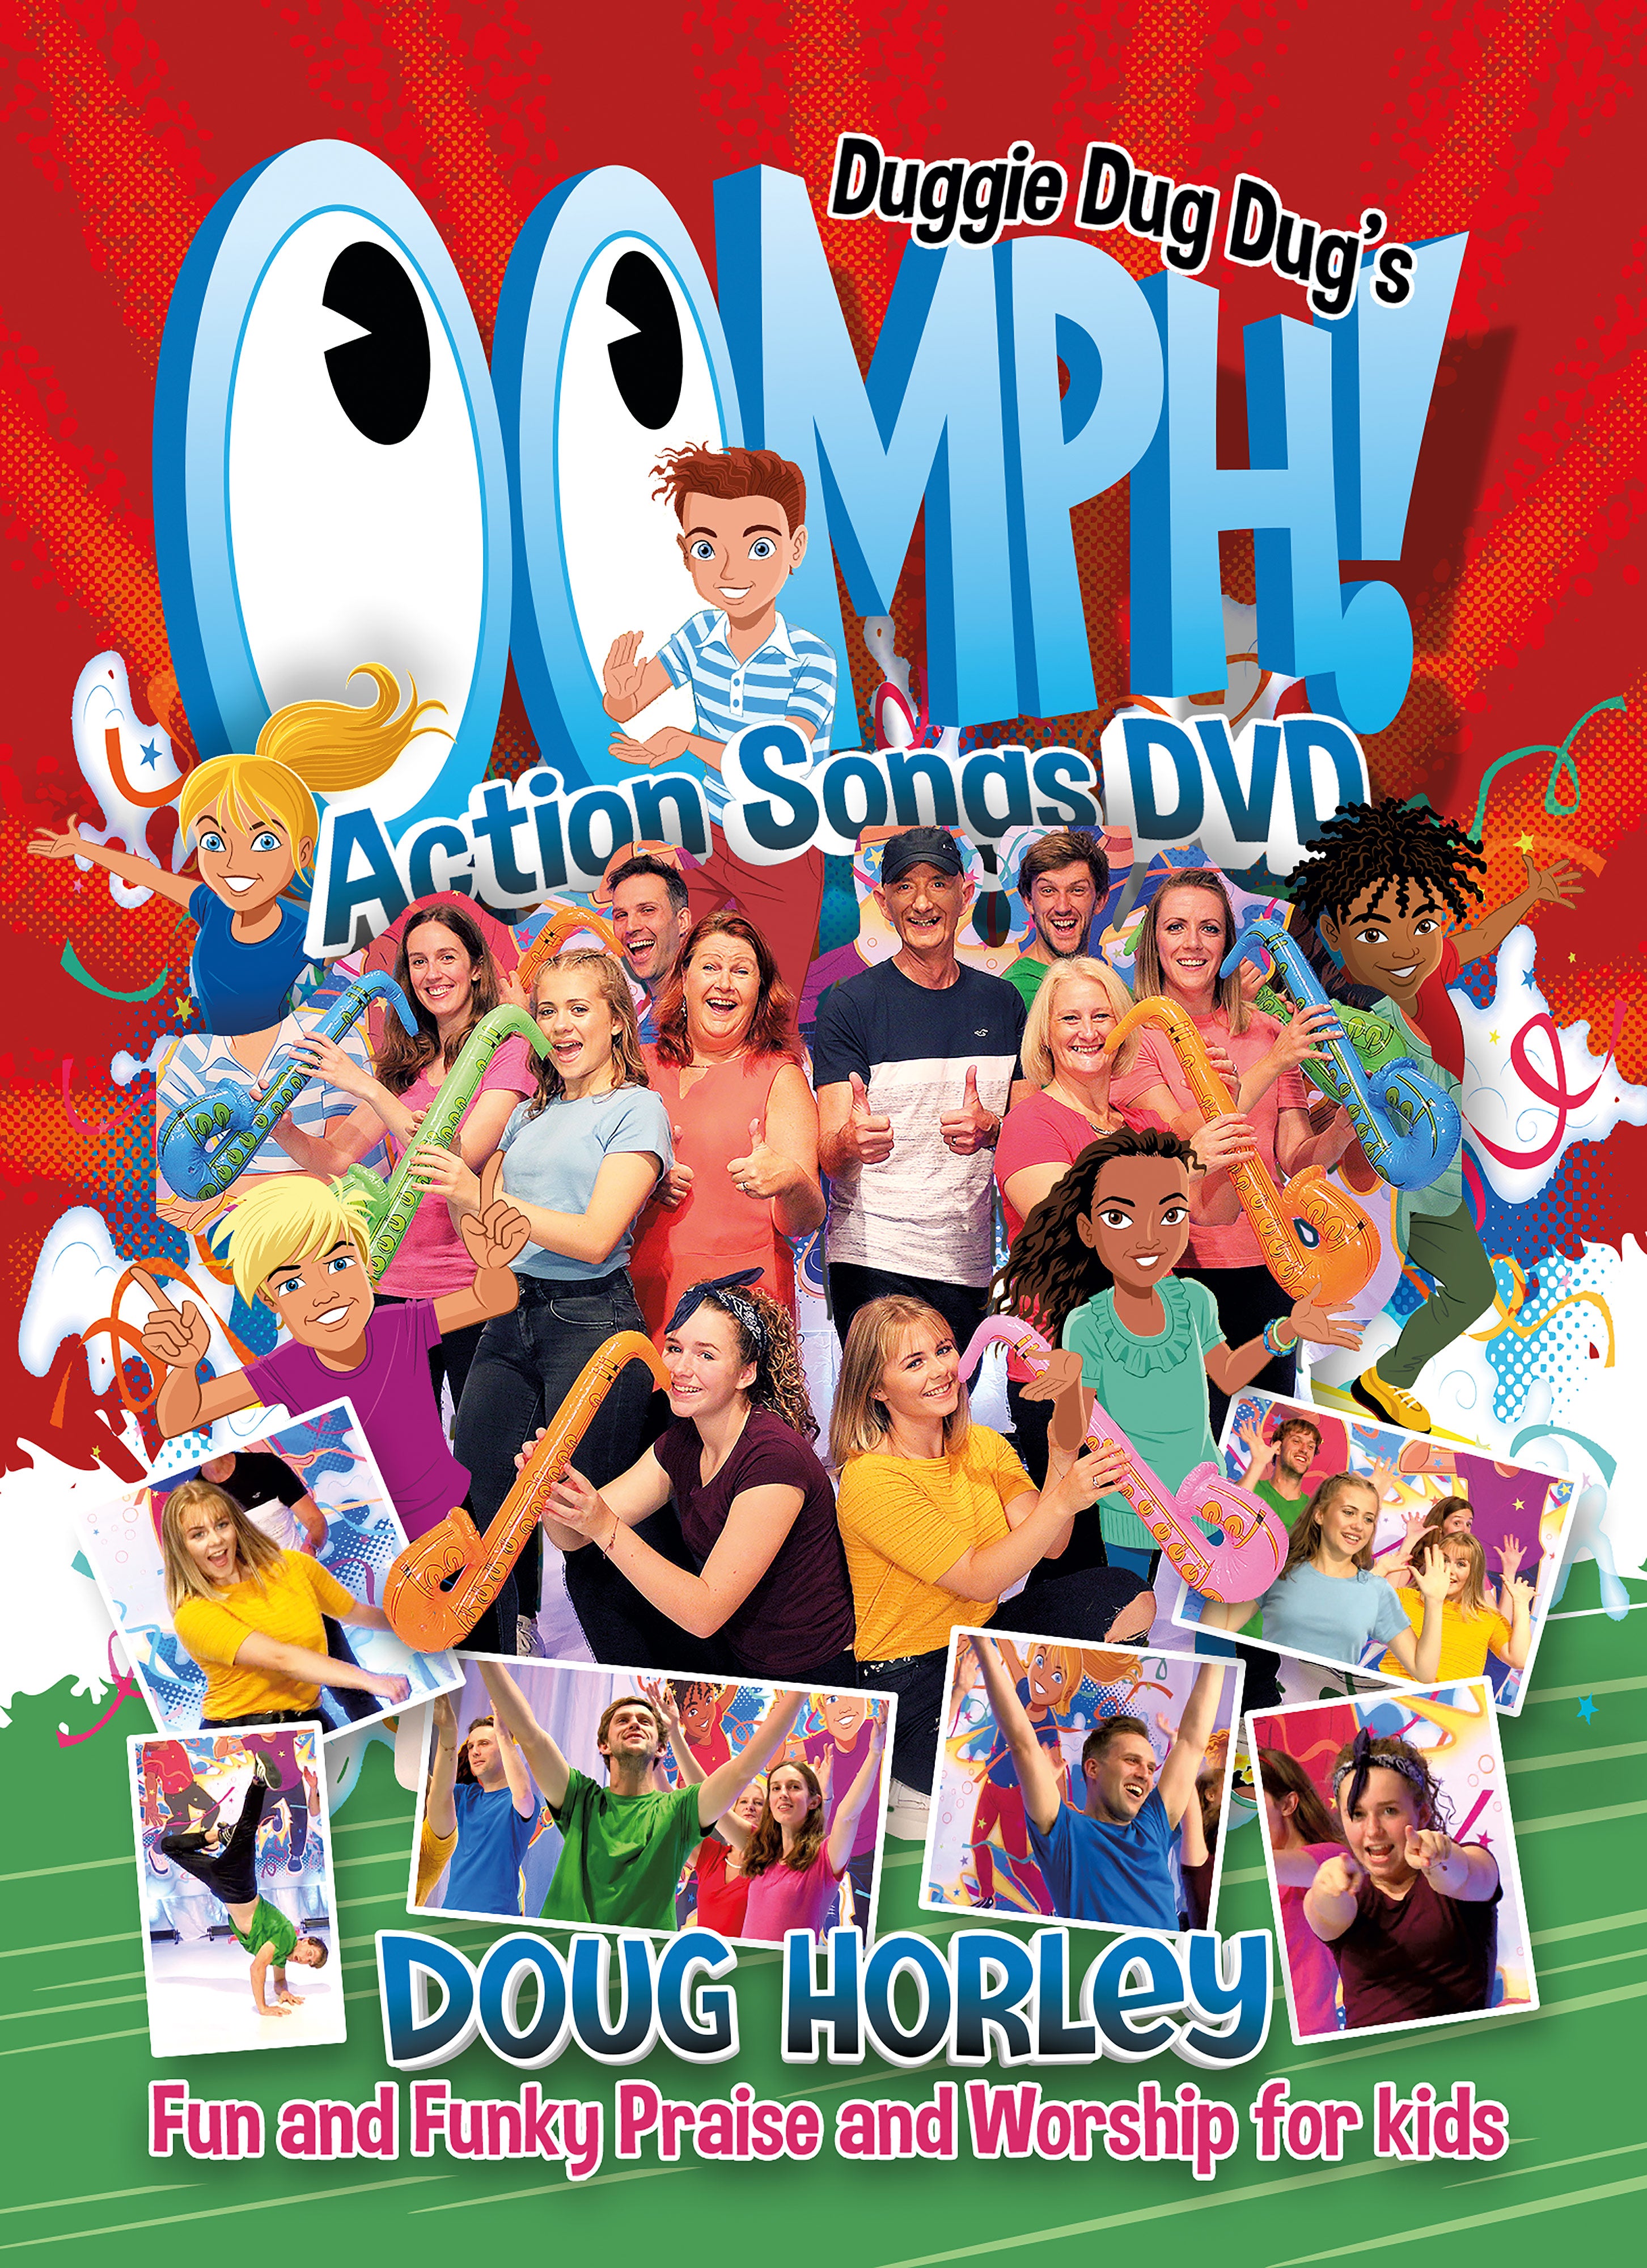 Image of Oomph! Action Songs DVD other